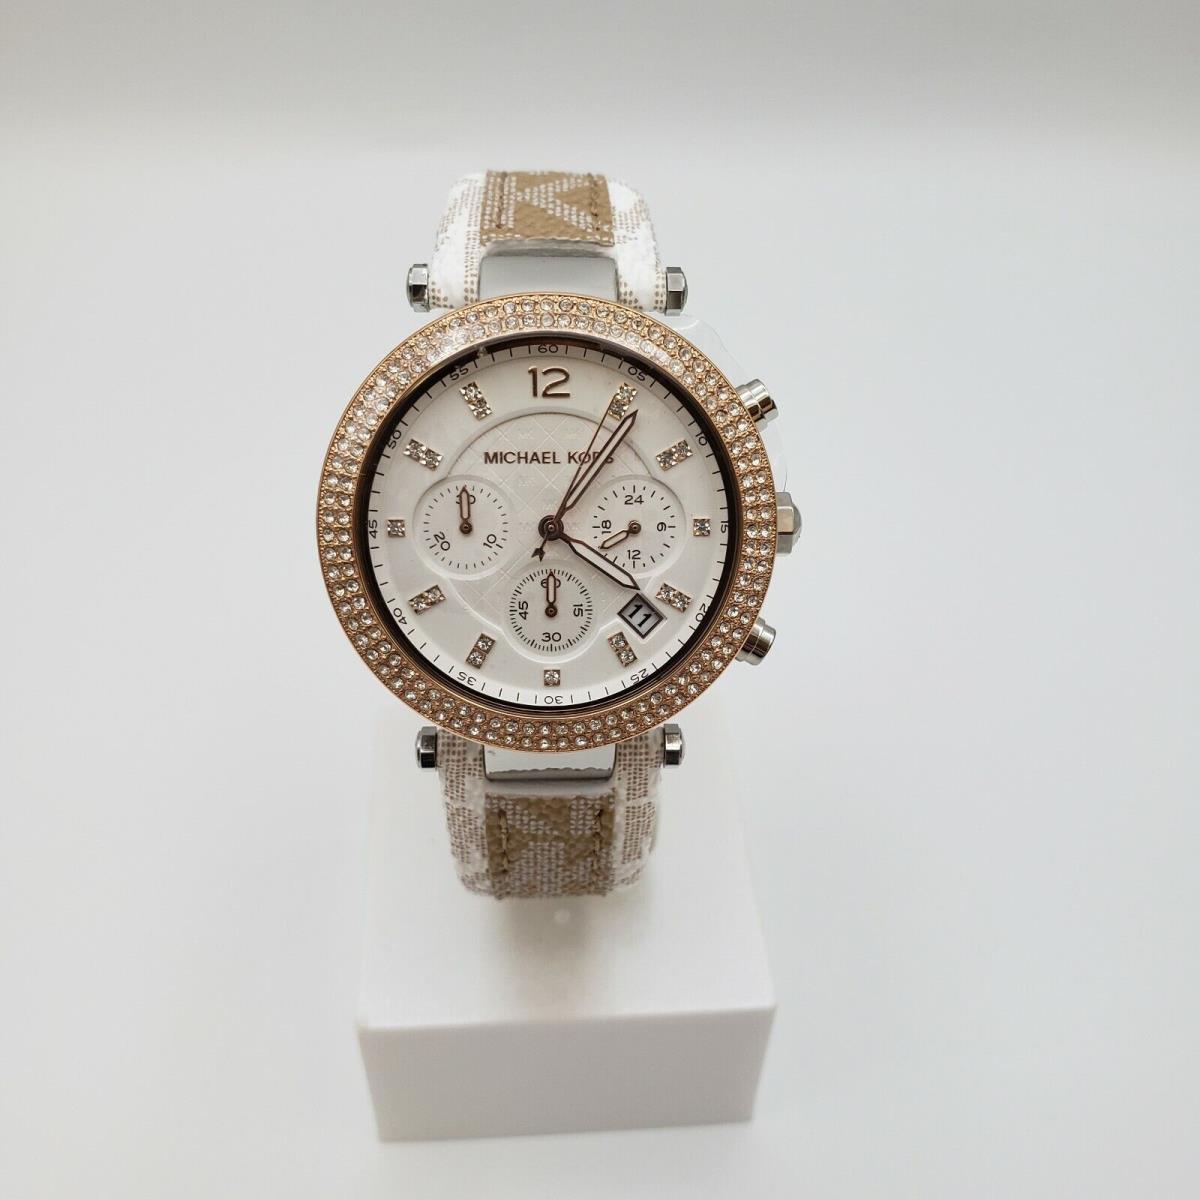 Michael Kors watch Parker - White Dial, Beige Band